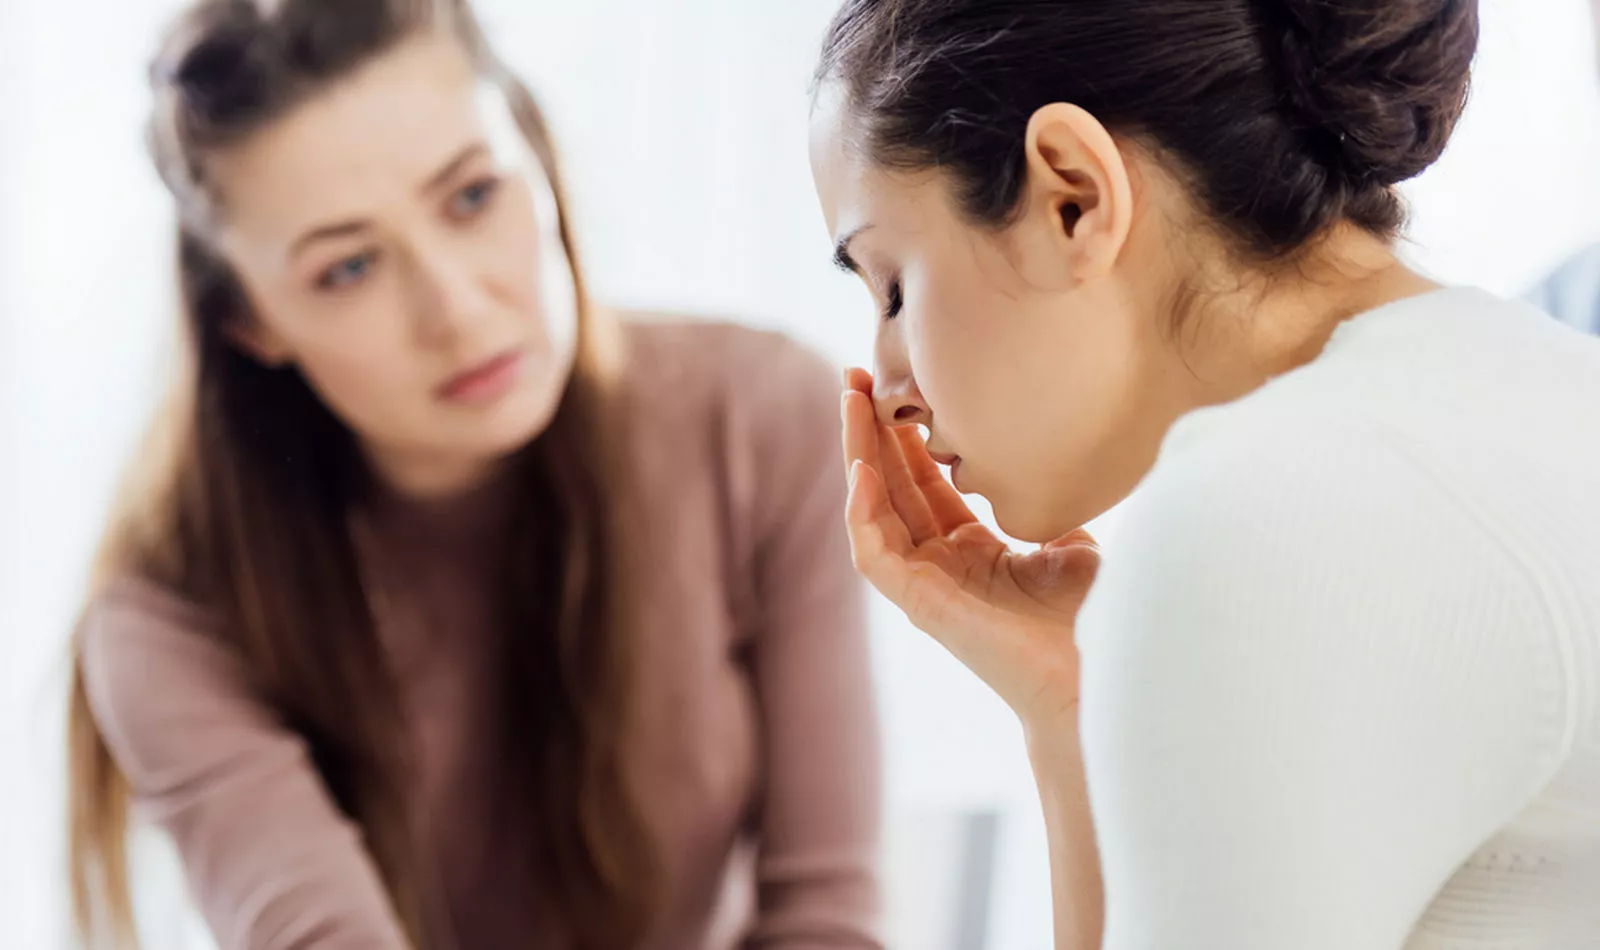 Emotional abuse counseling services in NYC